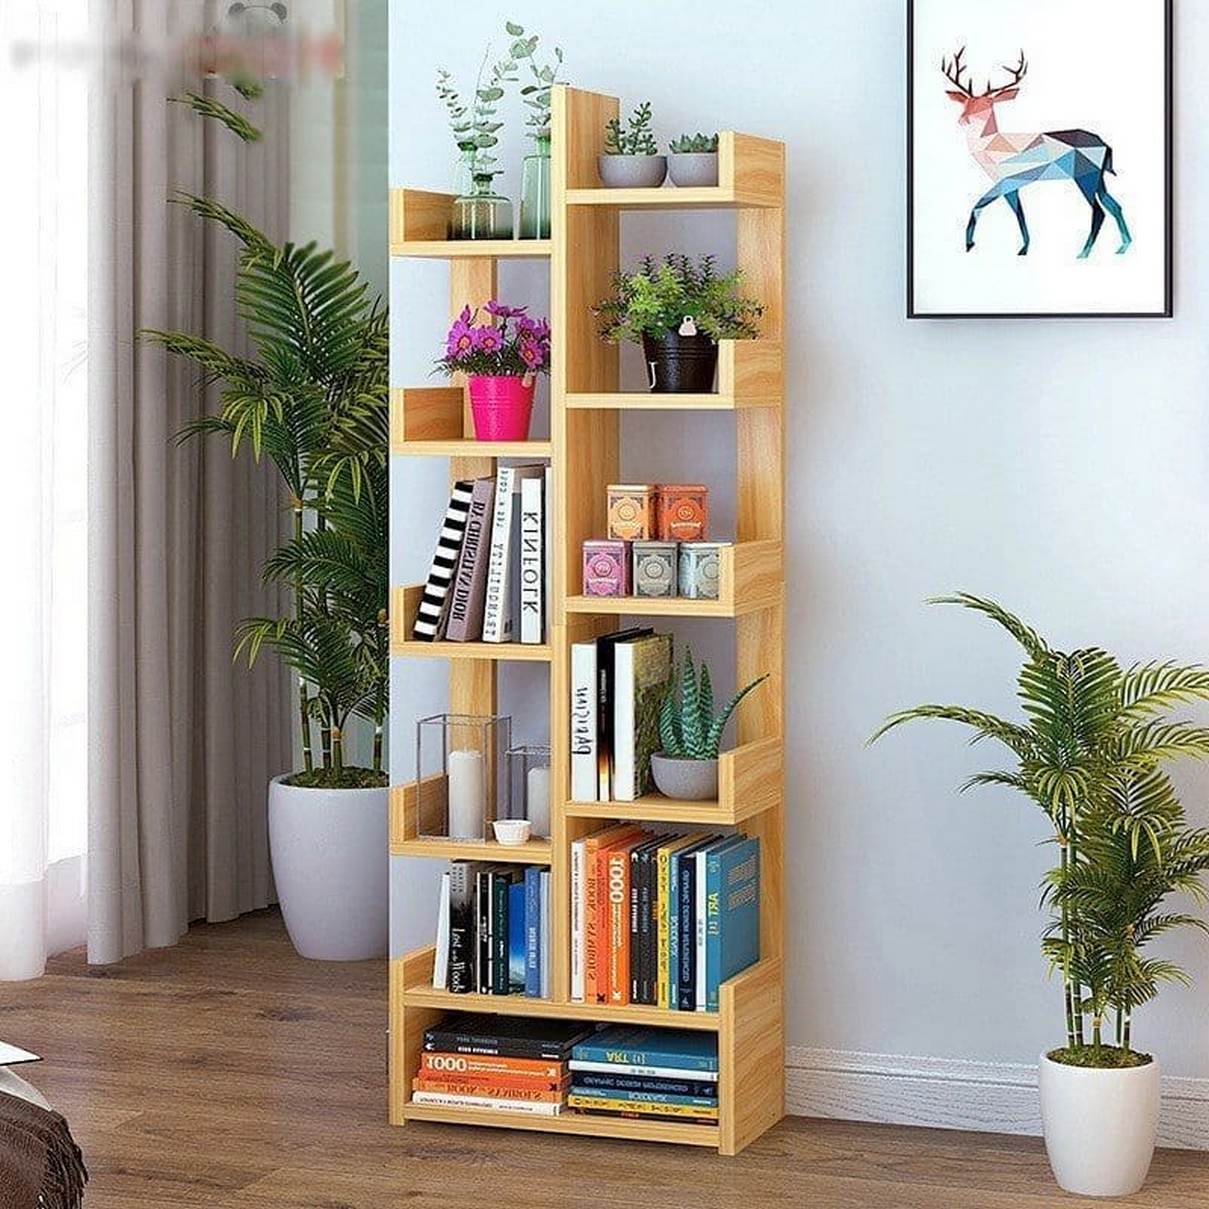 Most Popular Ways to Bookshelf Ideas For Your Living Room